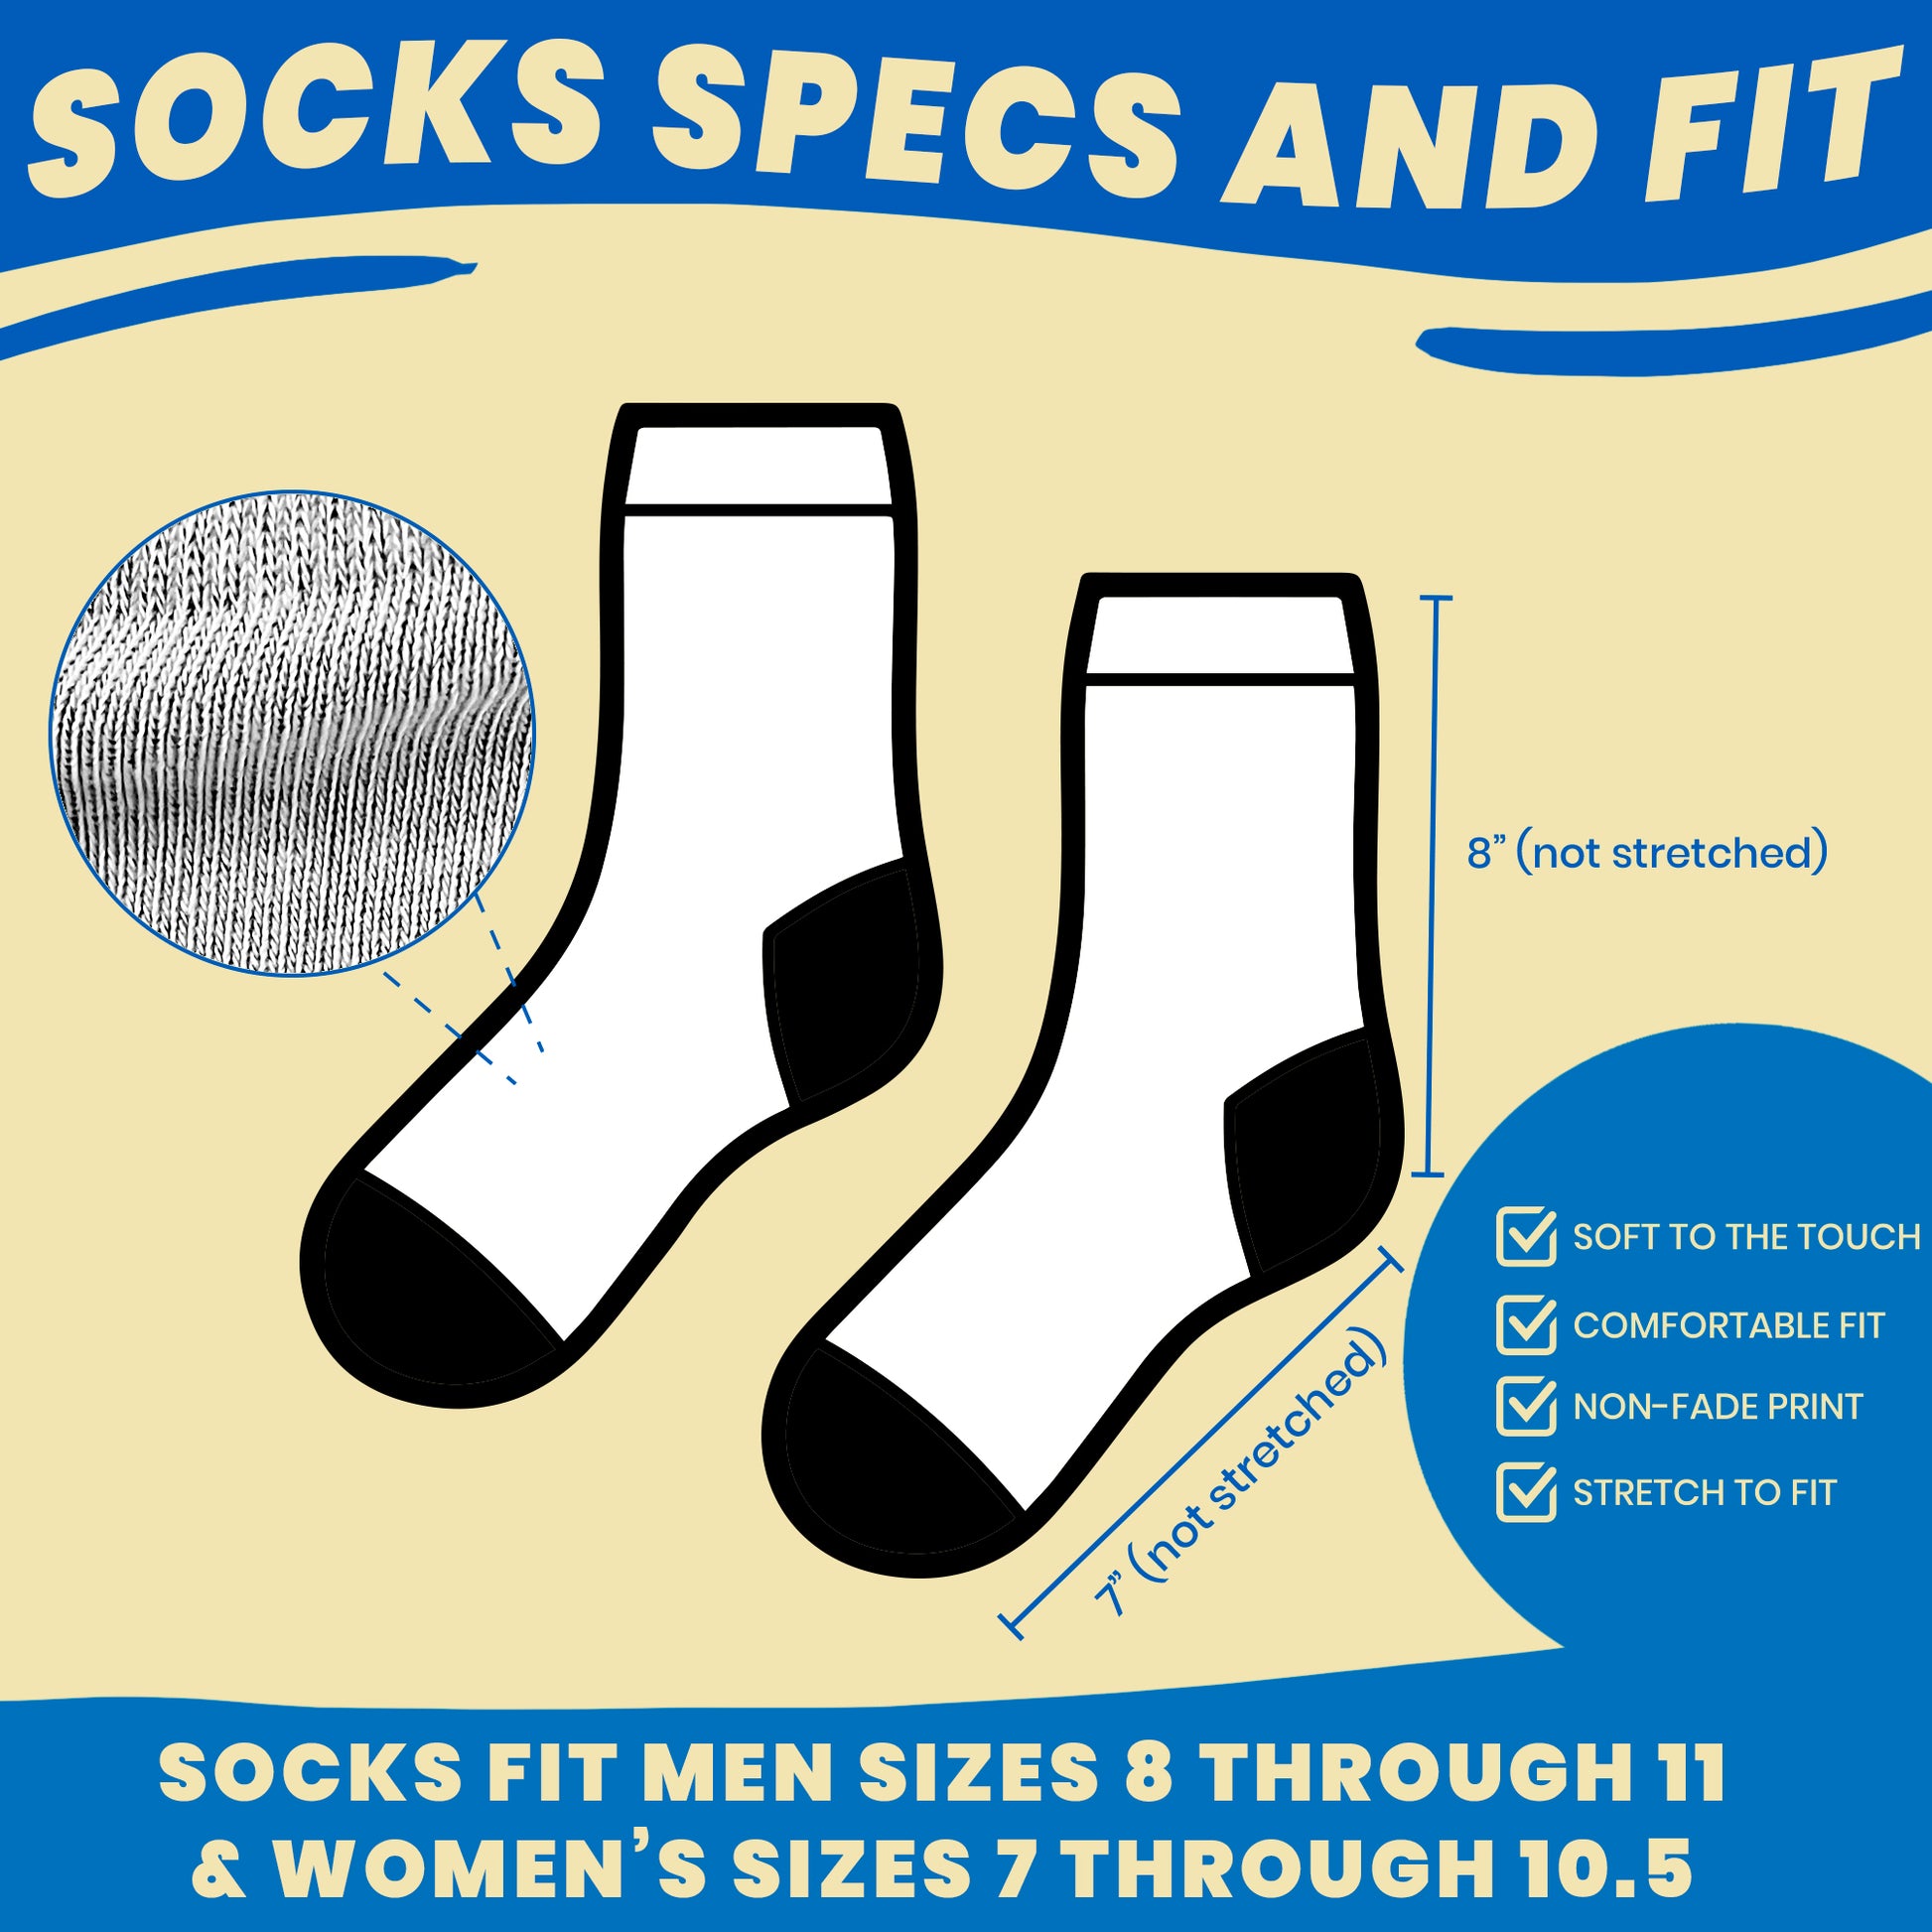 banker gift socks specs with size and feel of socks